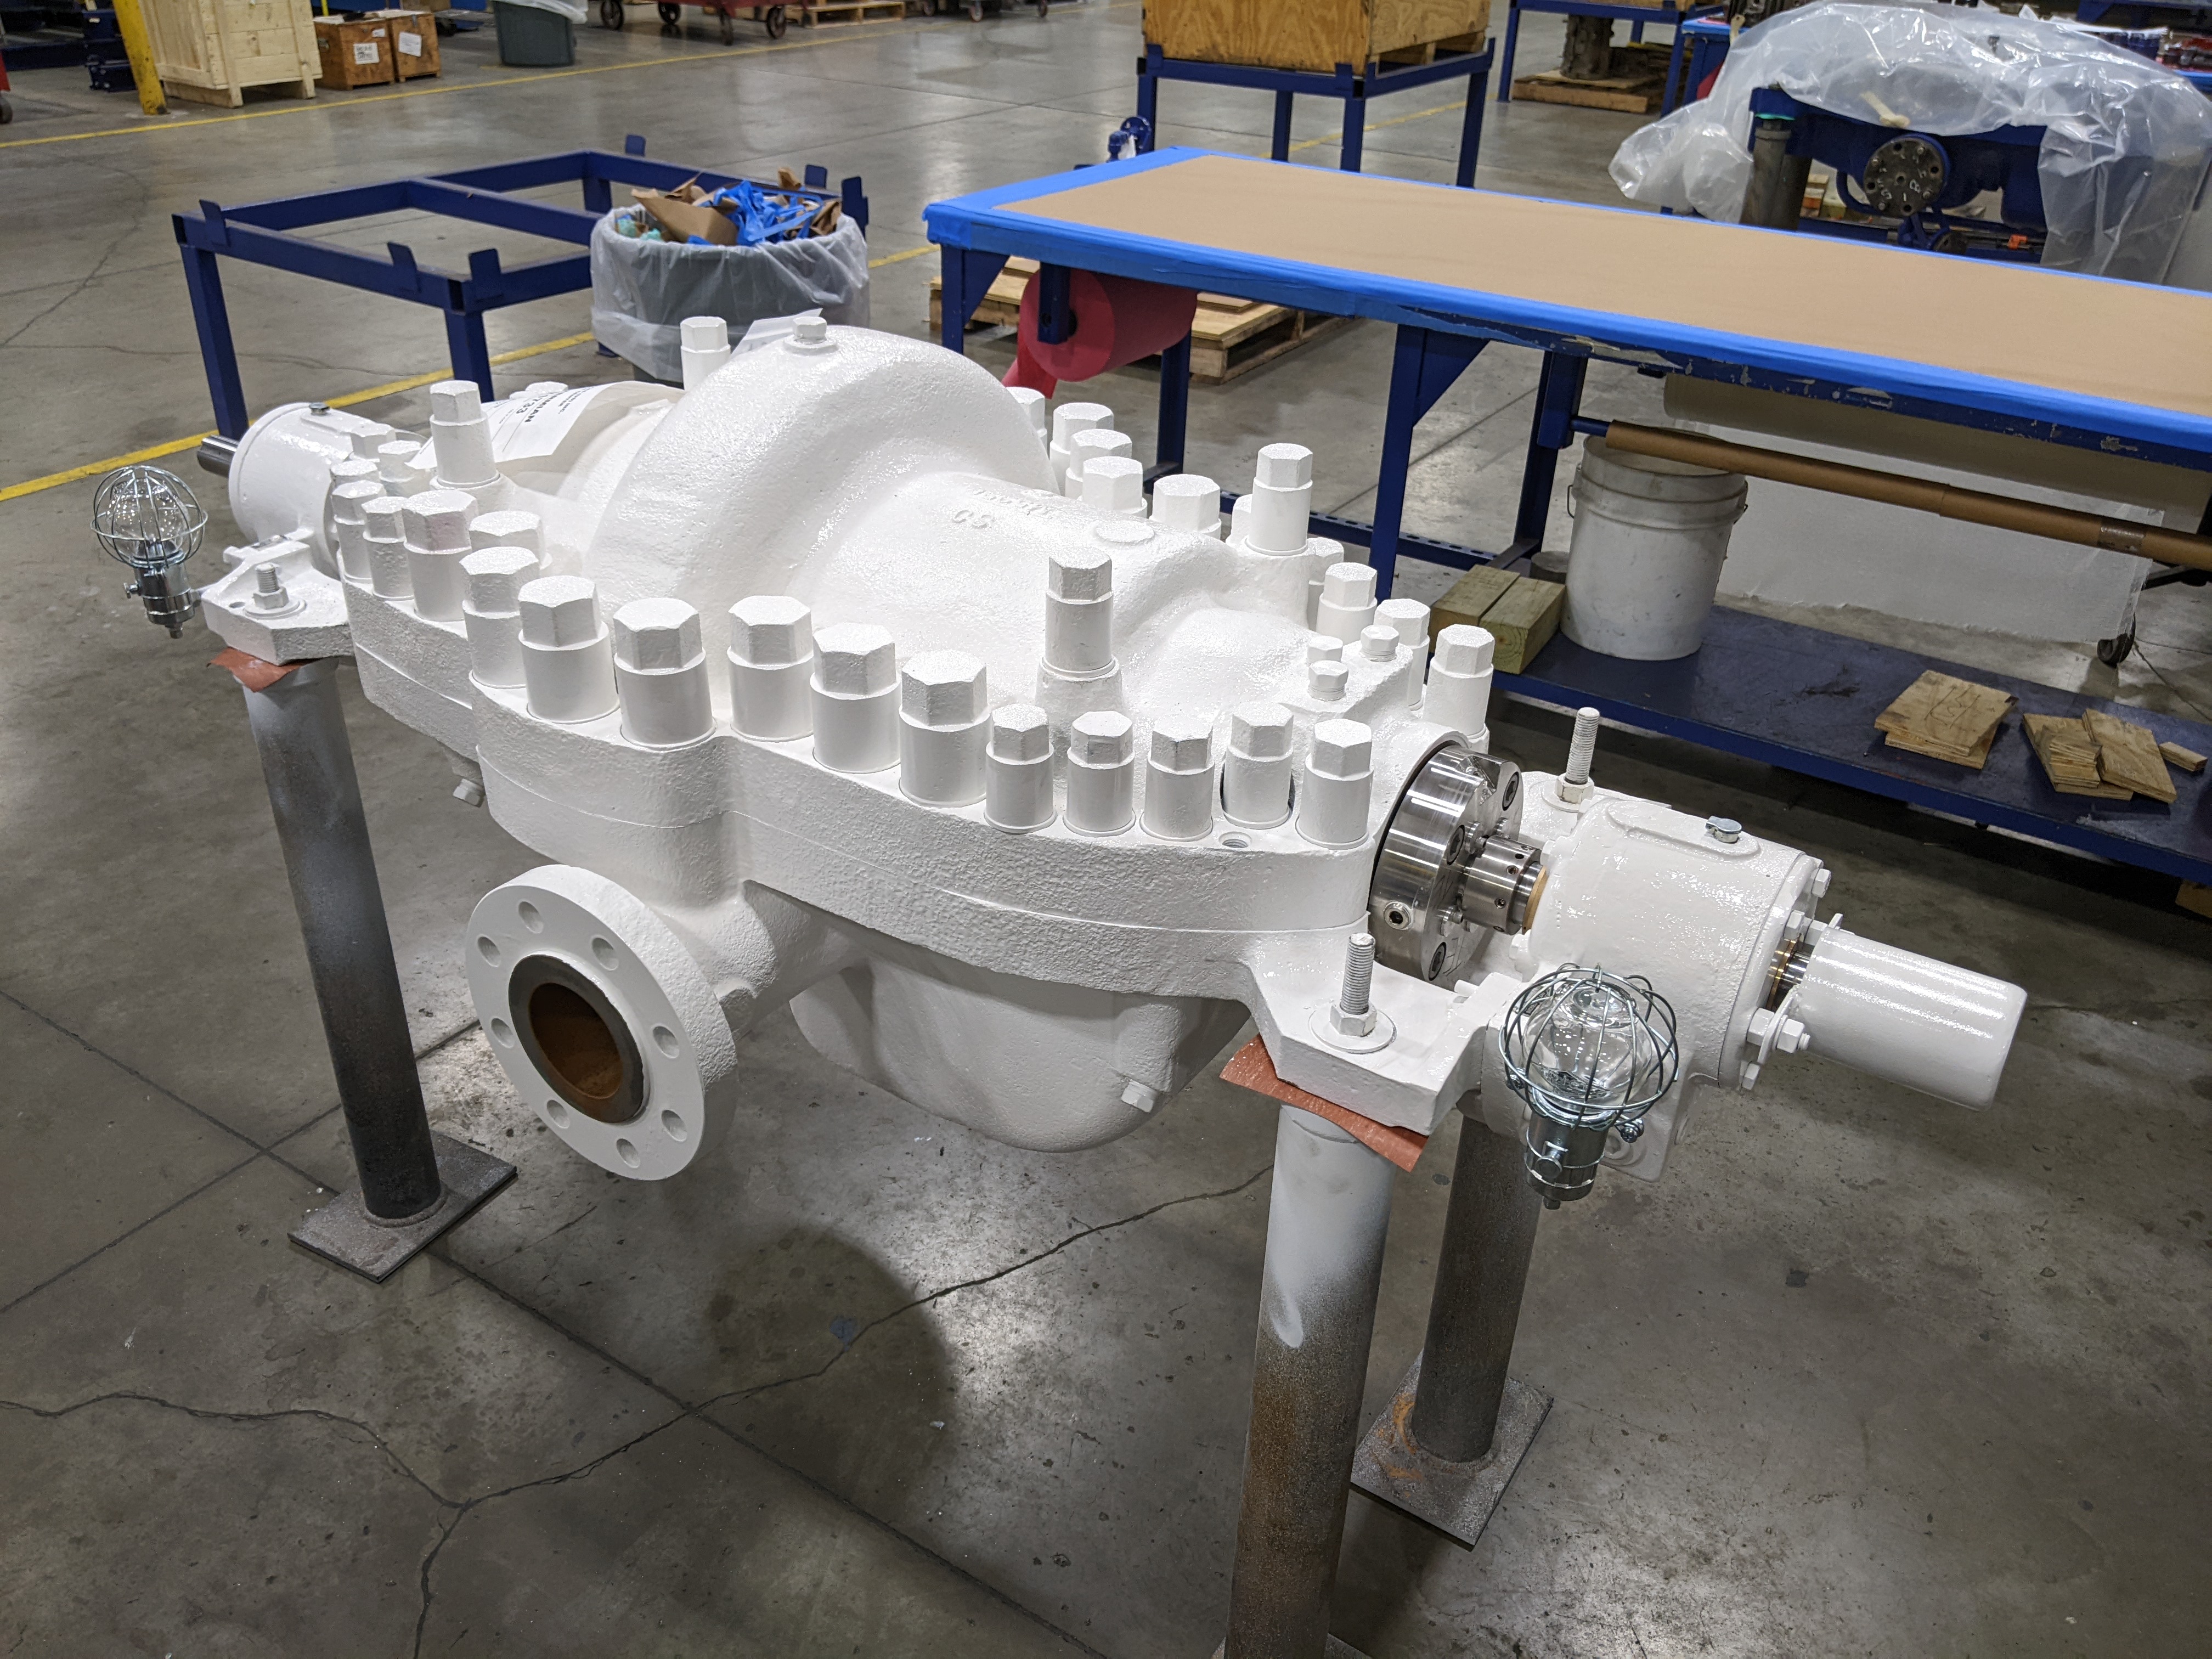 Once all parts were received, they underwent a preassembly process to allow the technicians to verify the fit and design of the new component, before the pump was prepared for shipment back to the customer